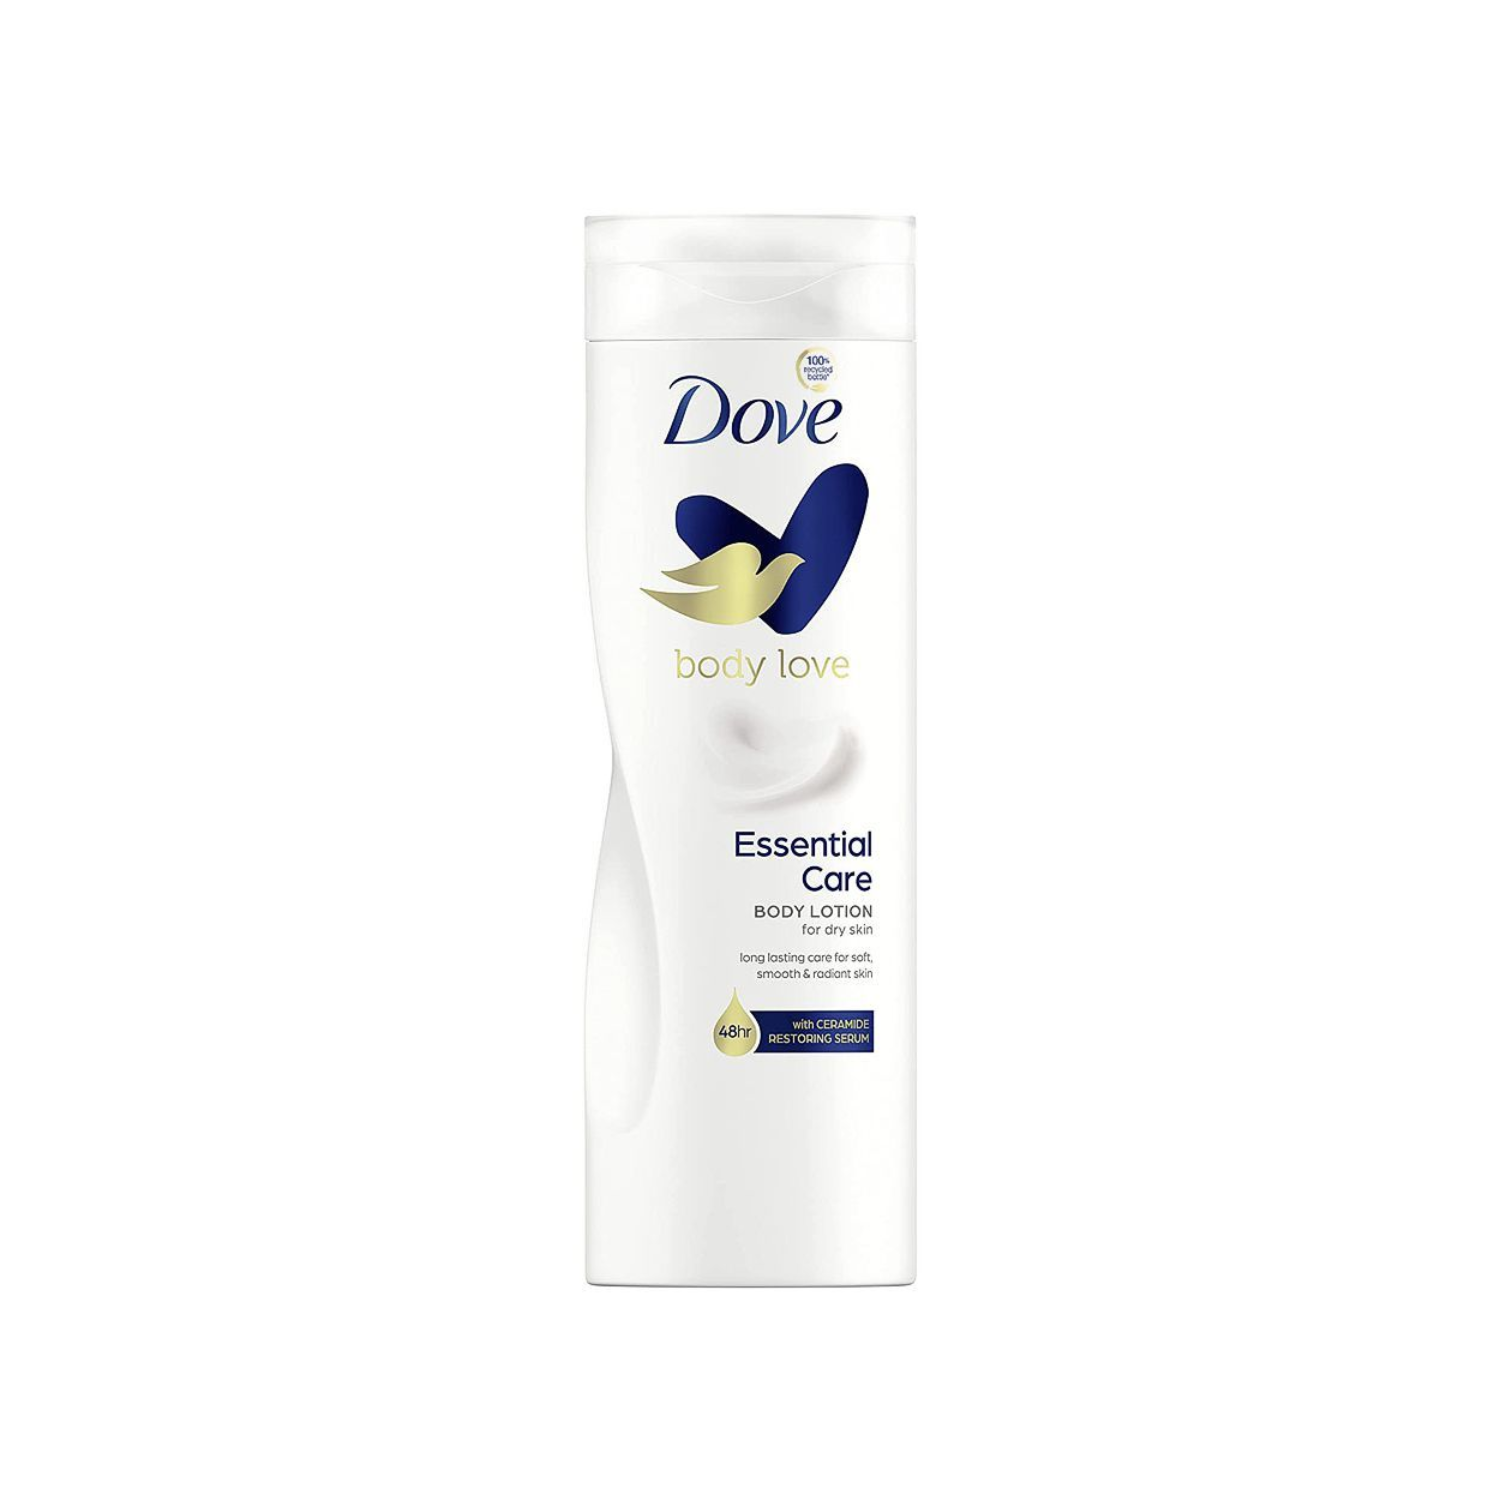 dove-body-love-essential-care-body-lotion-for-dry-skin-germany-400ml